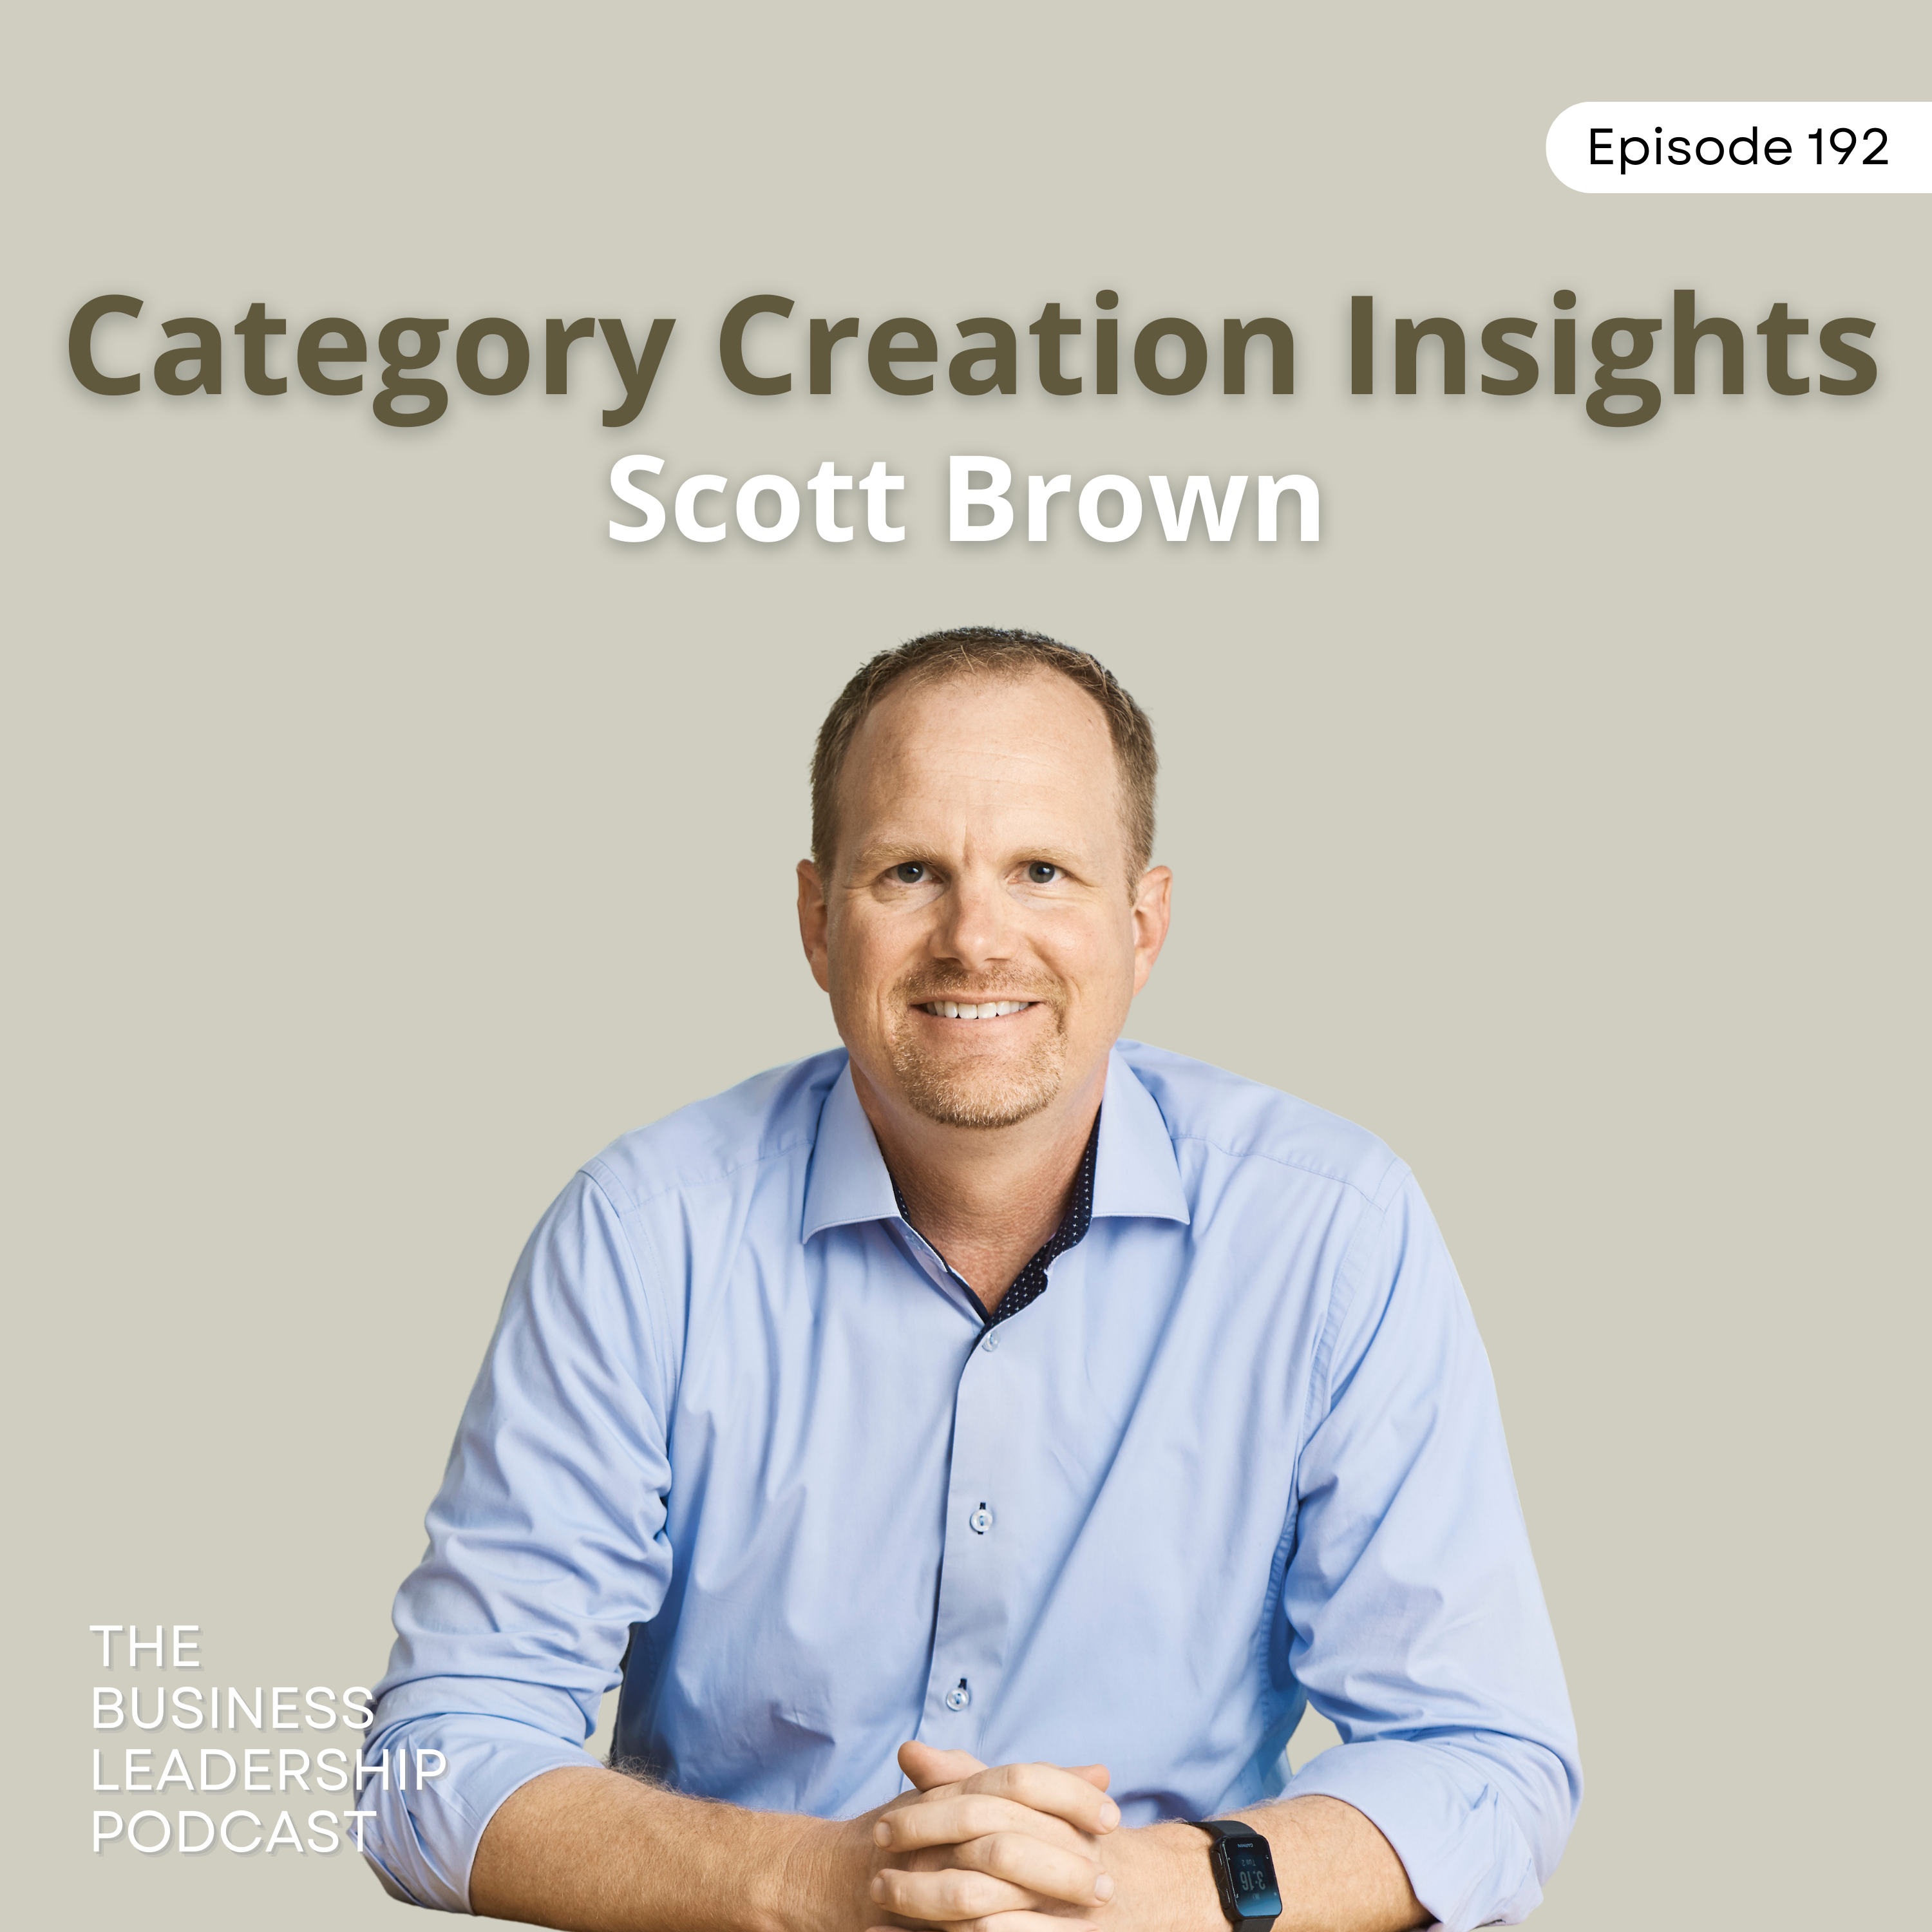 Category Creation Insights with Scott Brown